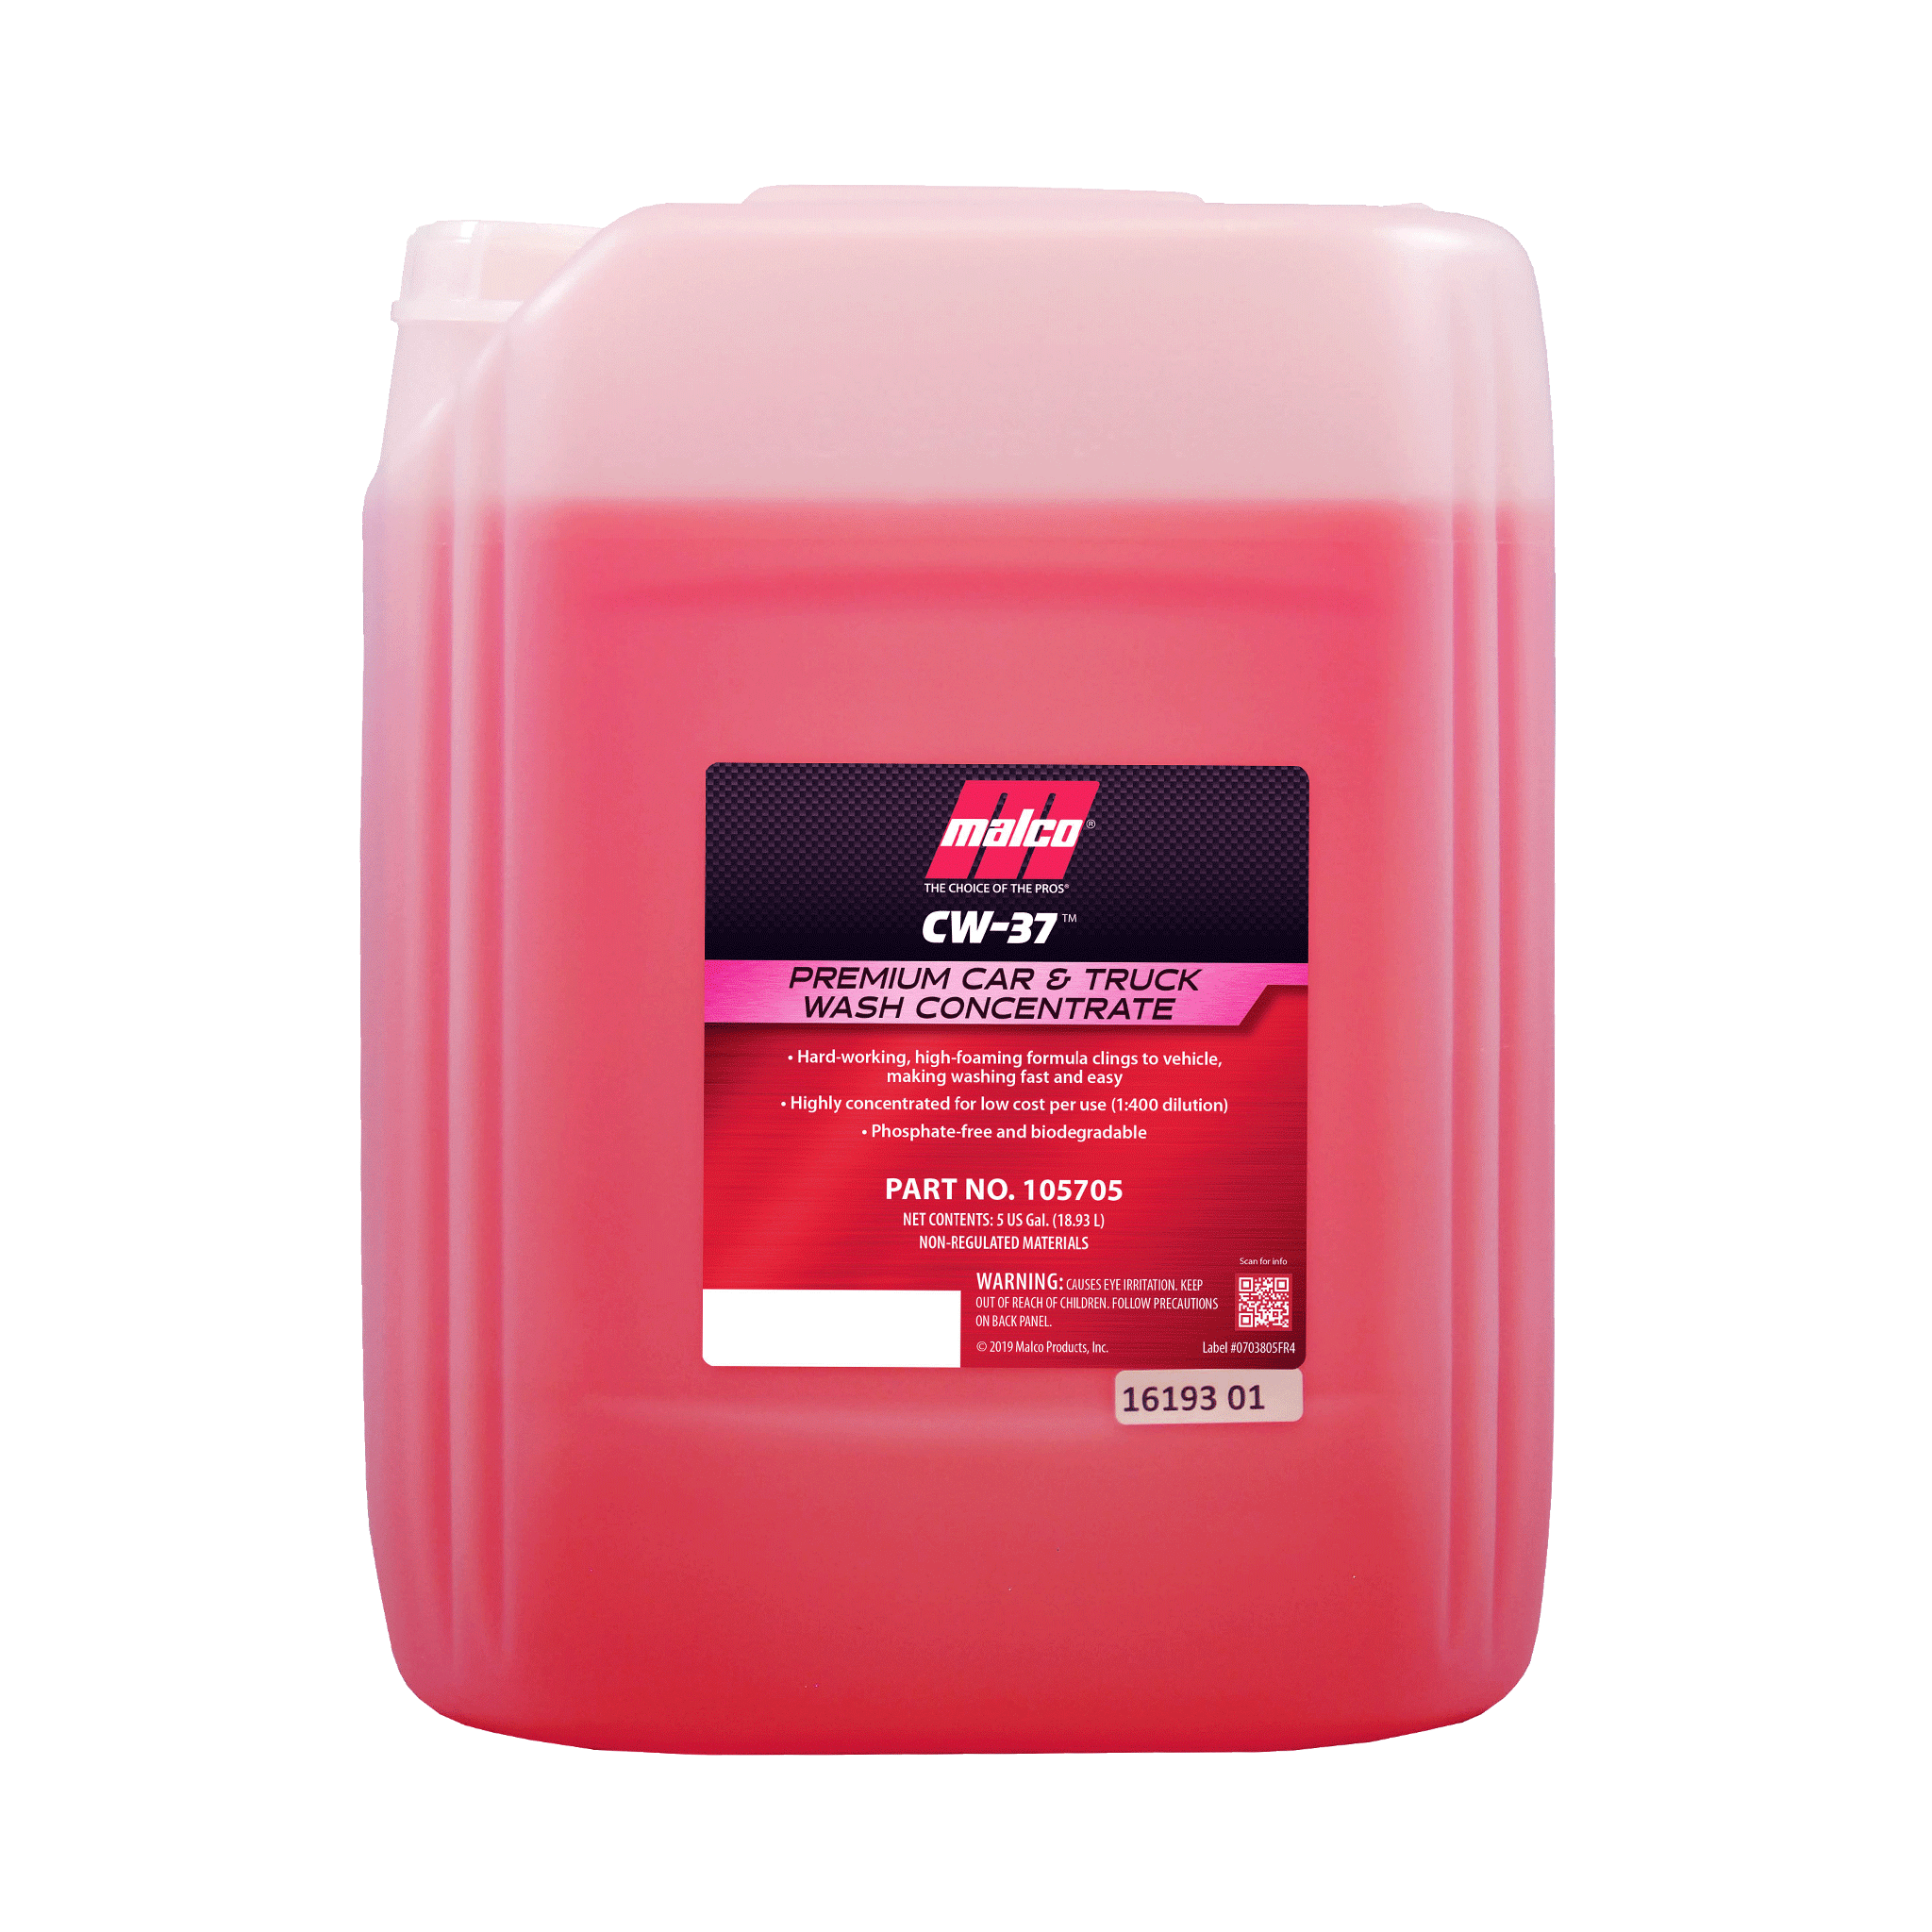 Malco Automotive DIST-ONLY-105705 Cw-37™ Premium Car & Truck Wash Concentrate